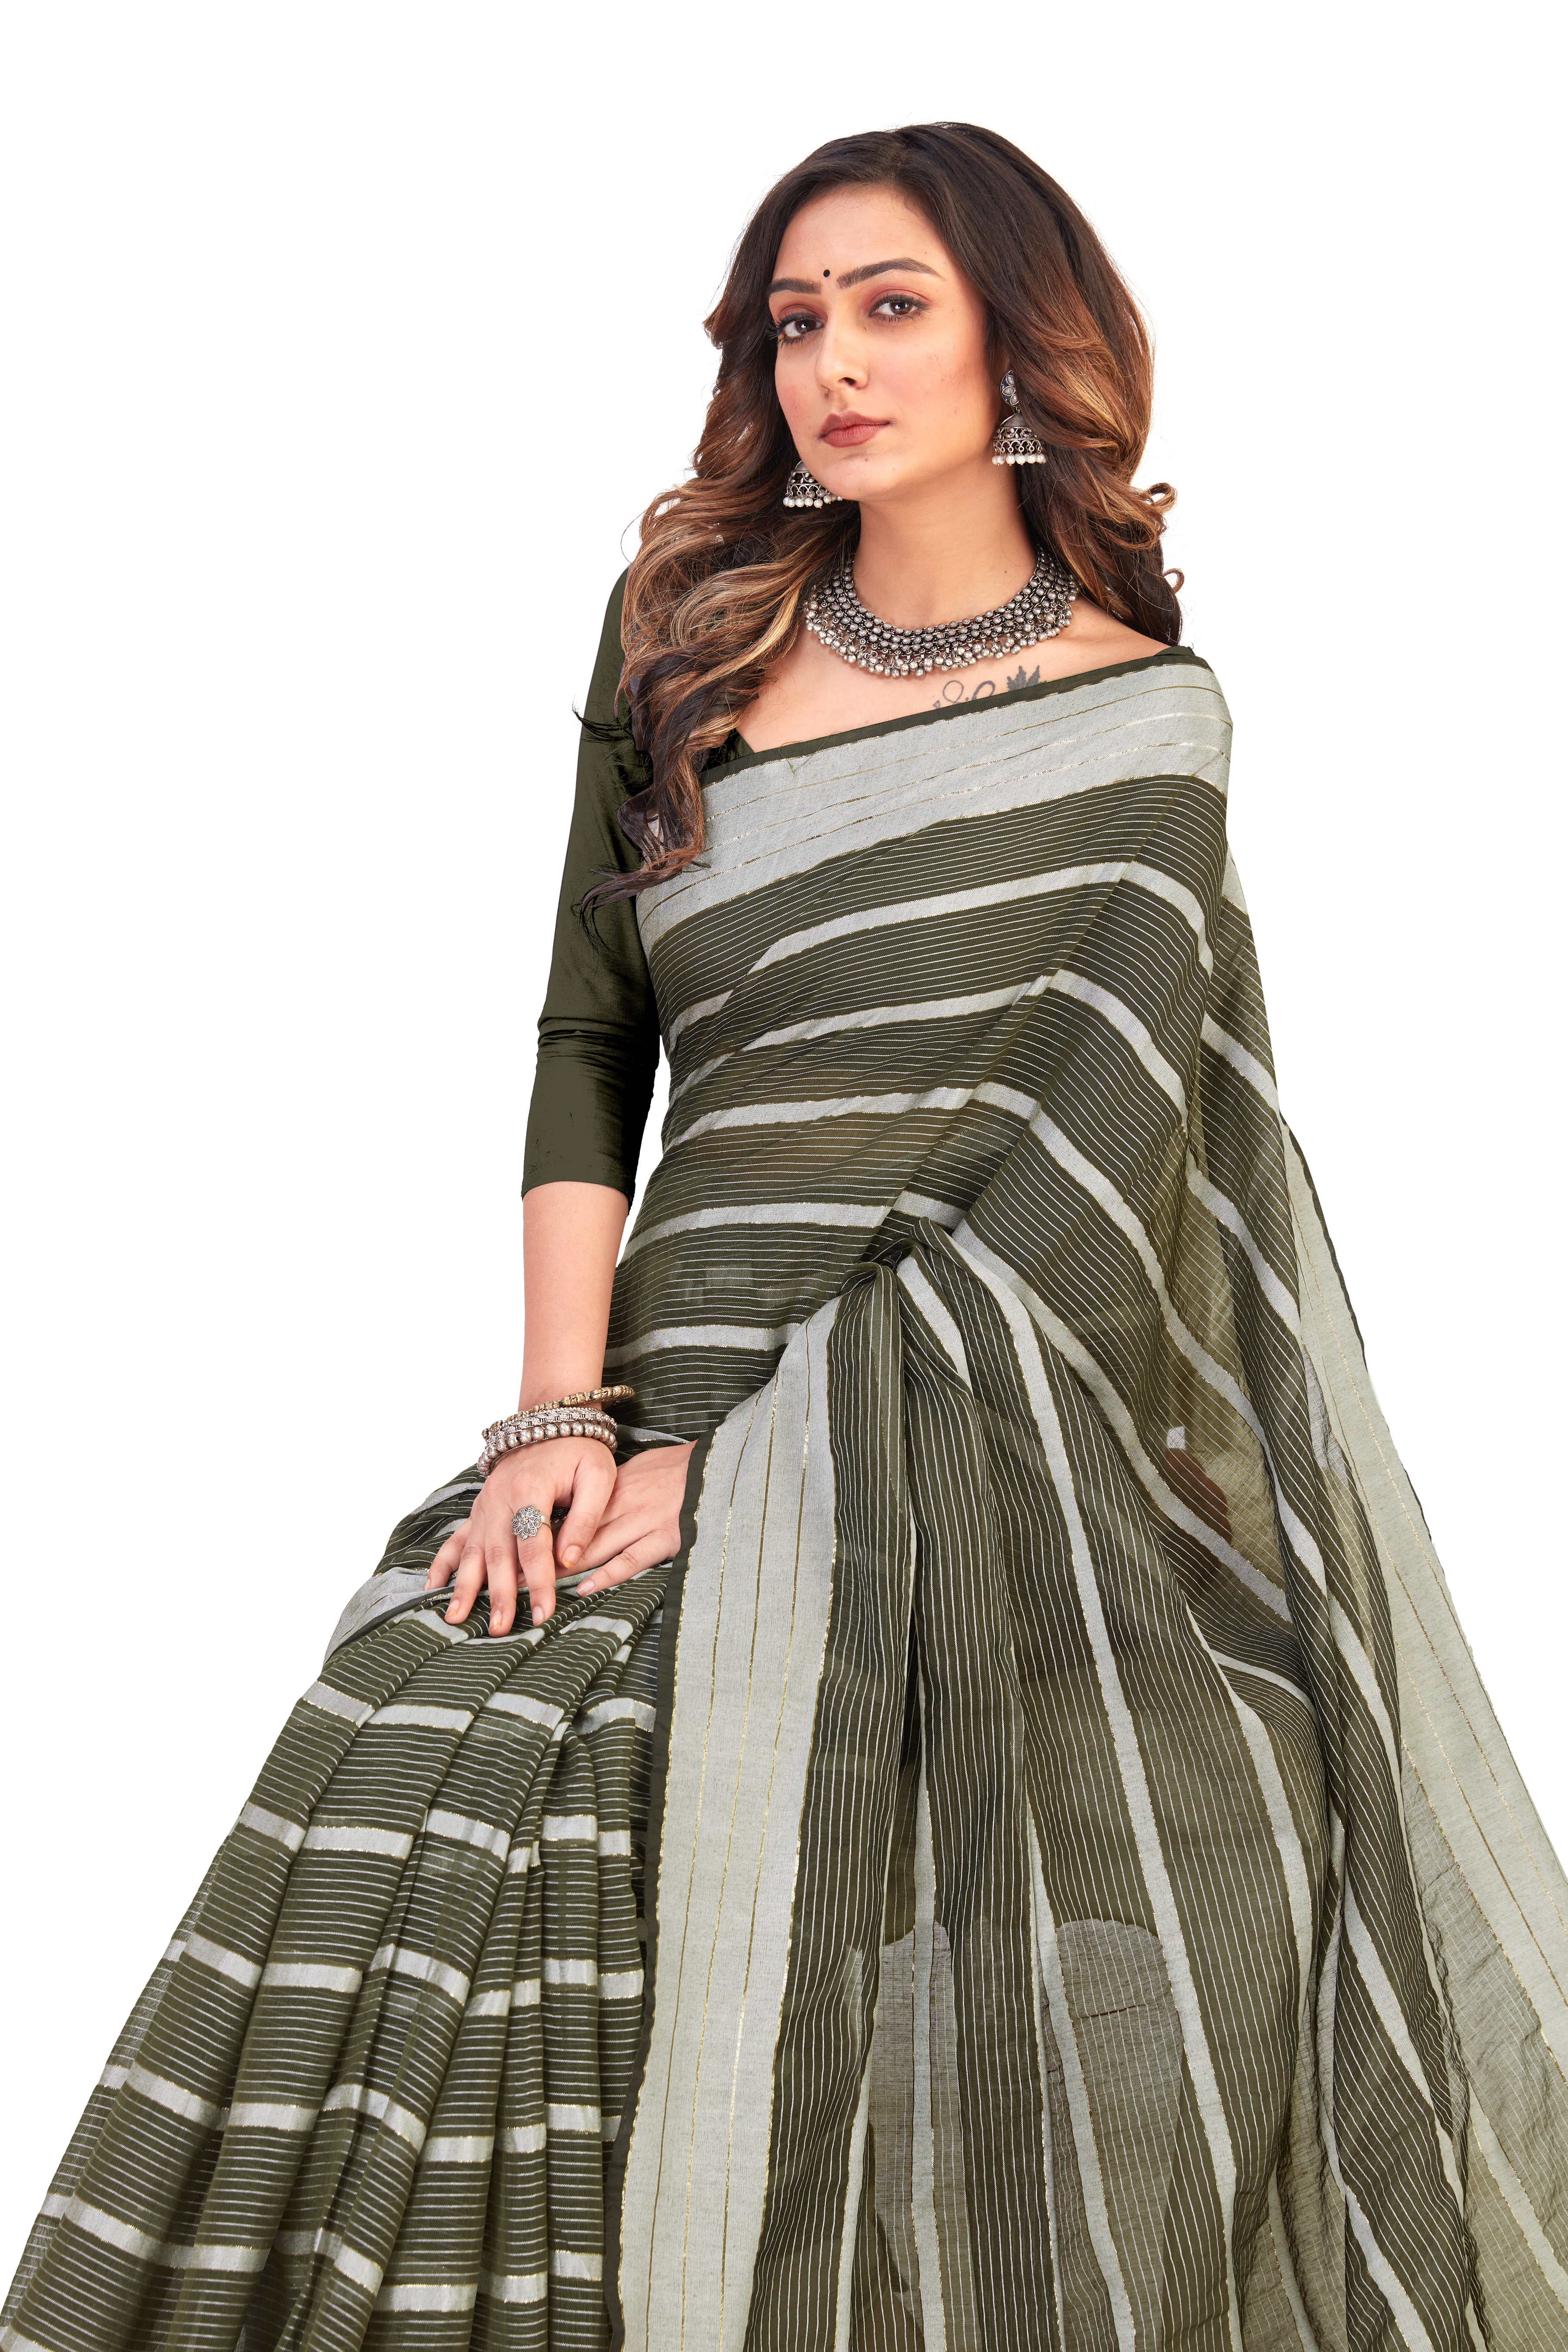 Women's Solid Self woven Striped Daily Wear Formal Cotton Bleand Saree With Blouse Piece (Mehandi Green) - NIMIDHYA